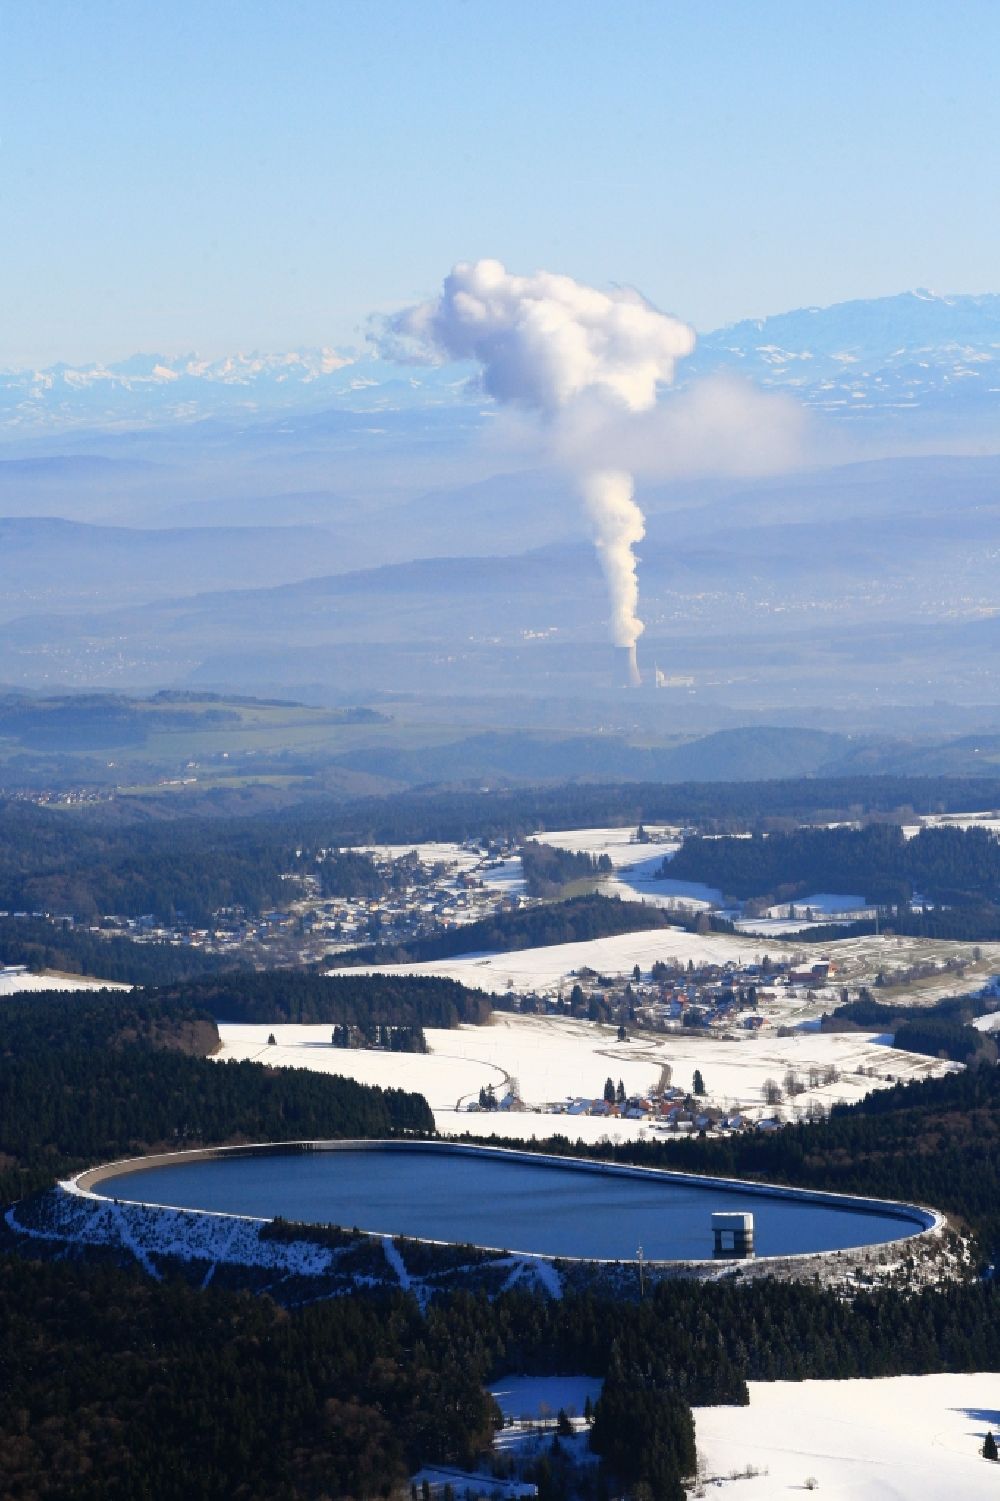 Aerial image Herrischried - In winter snowy landscape on the Hotzenwald in Herrischried in the state of Baden-Wuerttemberg, the Hornbergbecken is the high reservoir of the pumped storage hydro power station of the Schluchseewerk AG. In the background, the plume of nuclear power plant Leibstadt in Switzerland